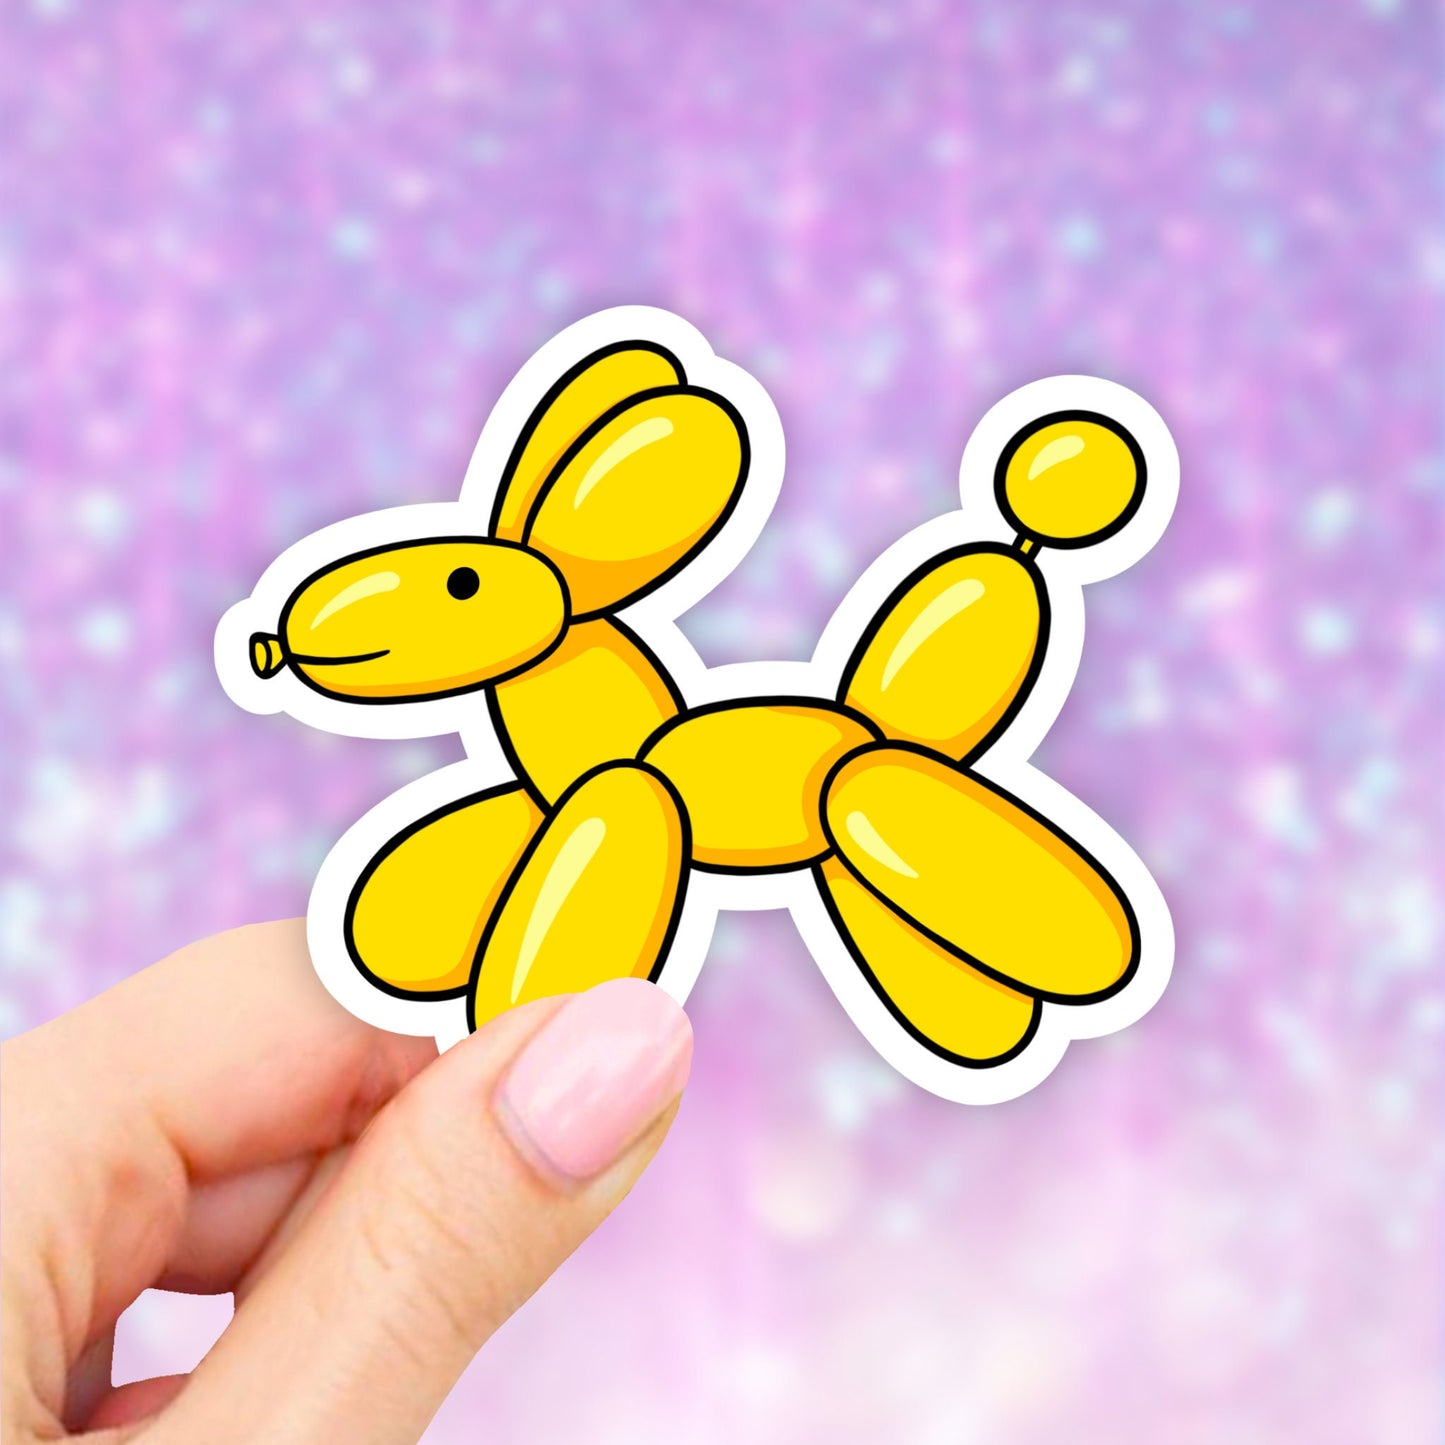 Yellow Balloon Dog Sticker, Laptop stickers, Aesthetic Stickers, Water bottle Stickers, Computer stickers, Waterproof Stickers